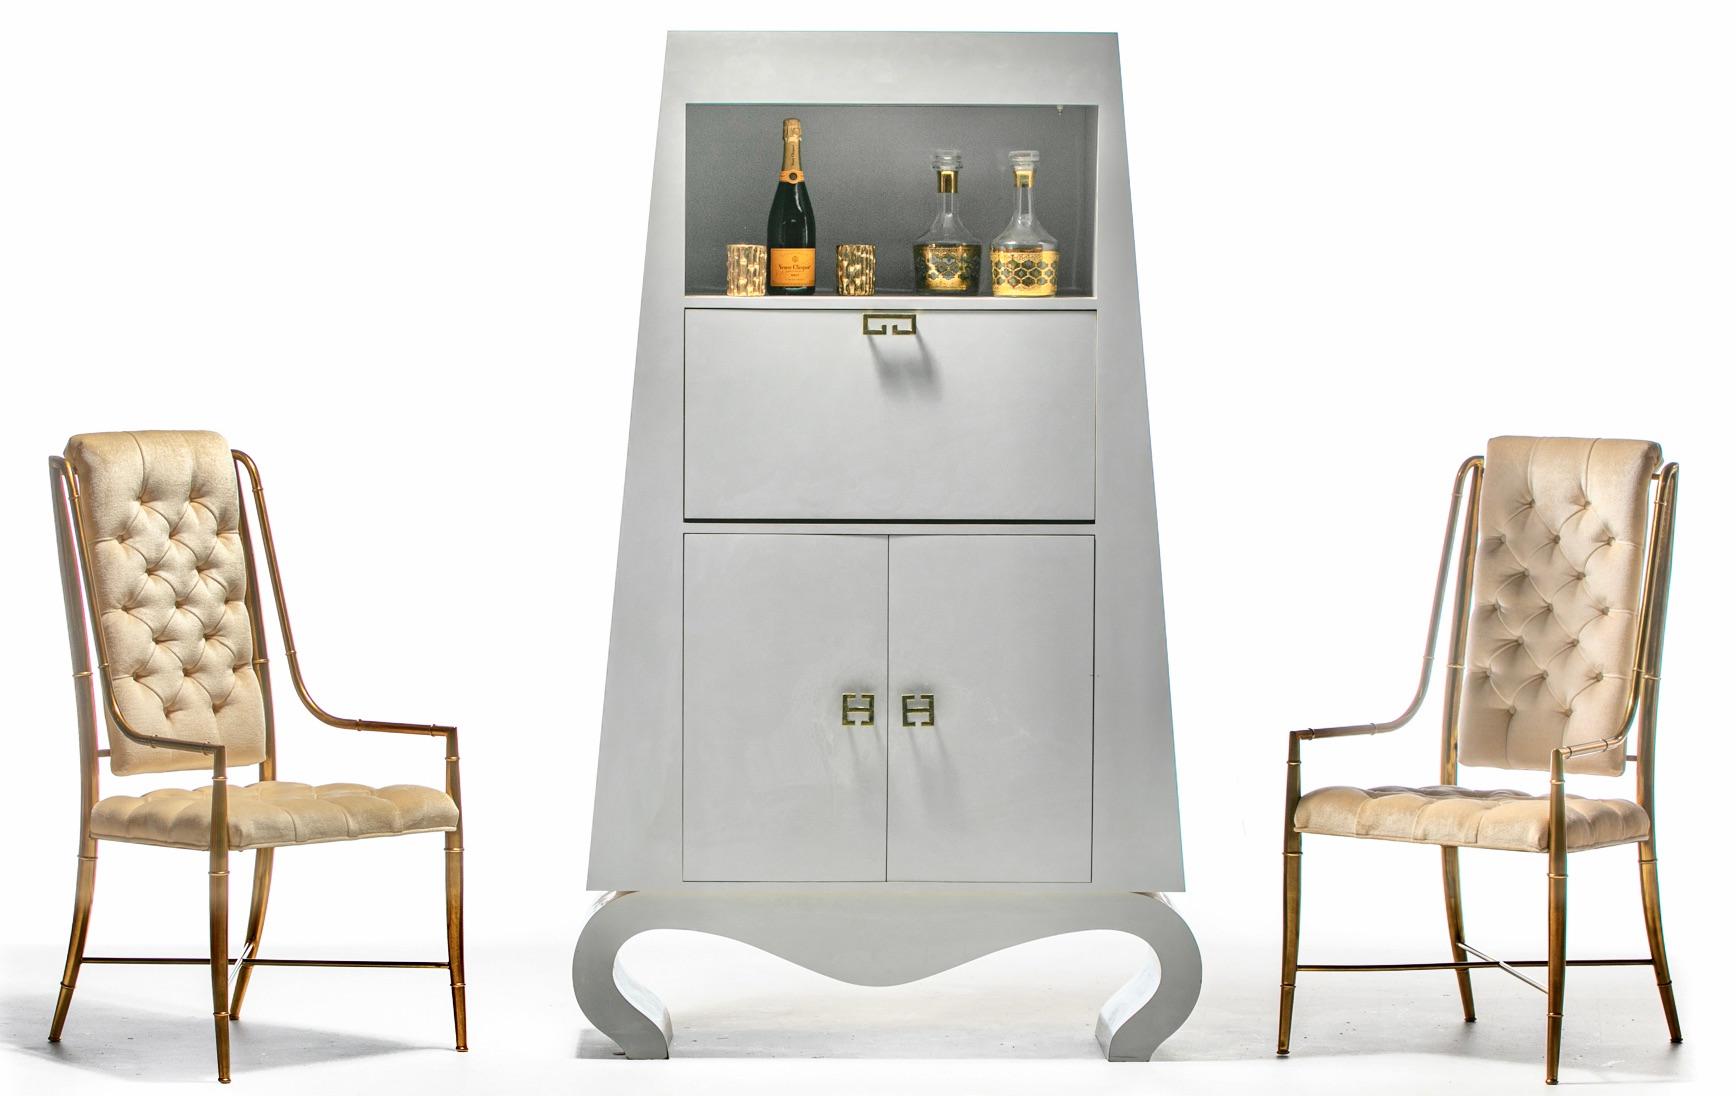 A really fun Post Modern bar cabinet with a Chinoiserie nod that adds an uplifting air whether in or out of use into any space. Go from sexy sculptural cabinet to chic cocktail party in just one flap. Drop down counter is perfect for mixing your